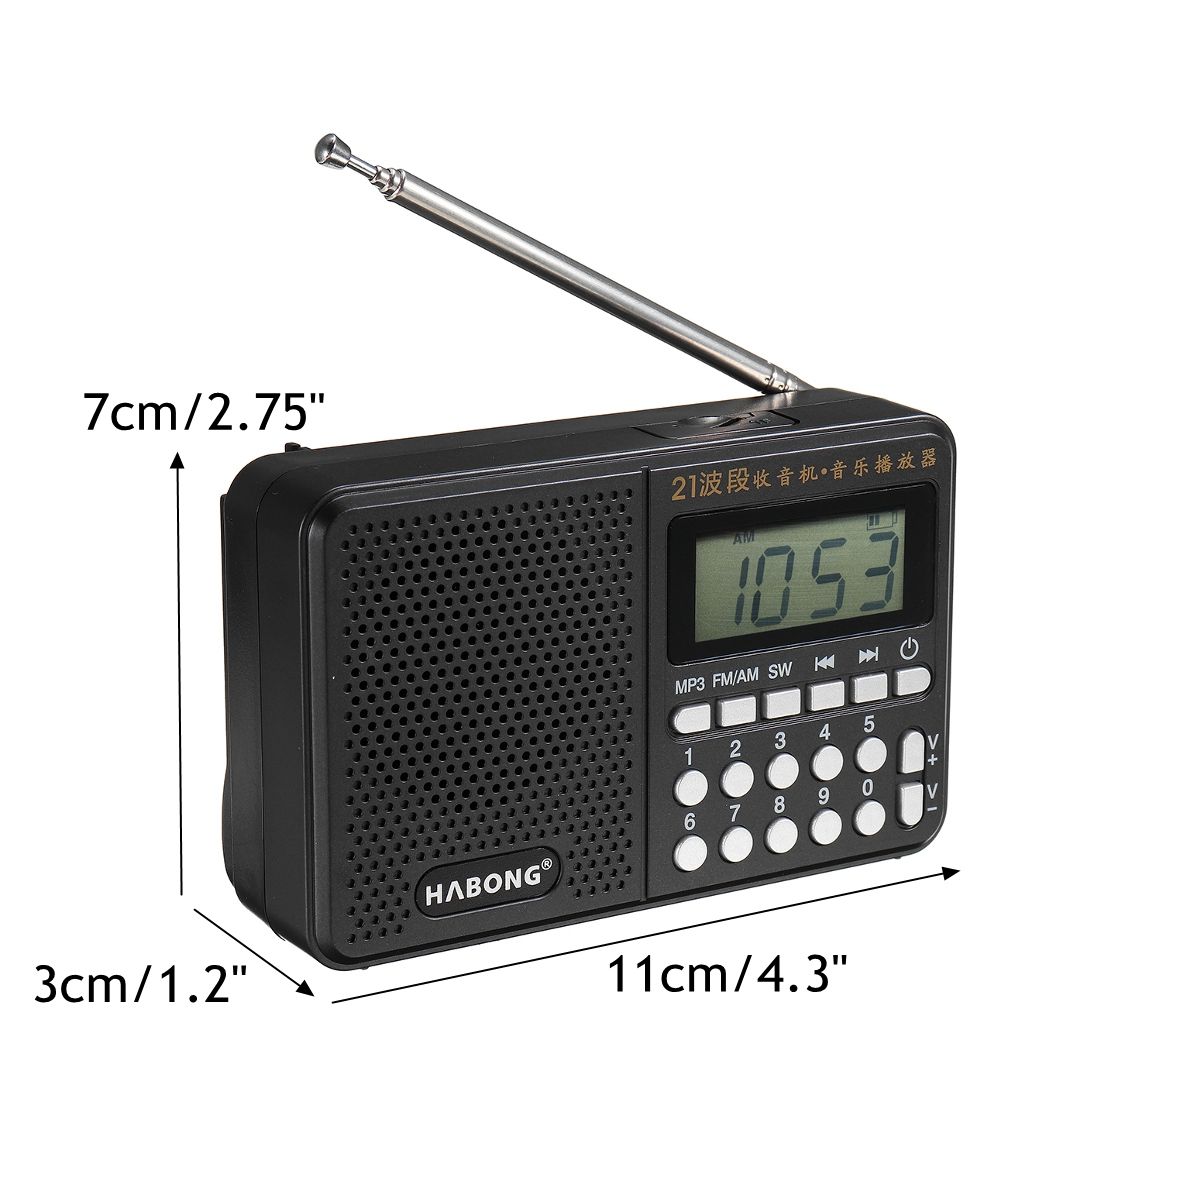 Portable-Digital-FM-AM-SW-Radio-21-Band-Charge-Receiver-Speaker-MP3-Player-1440437